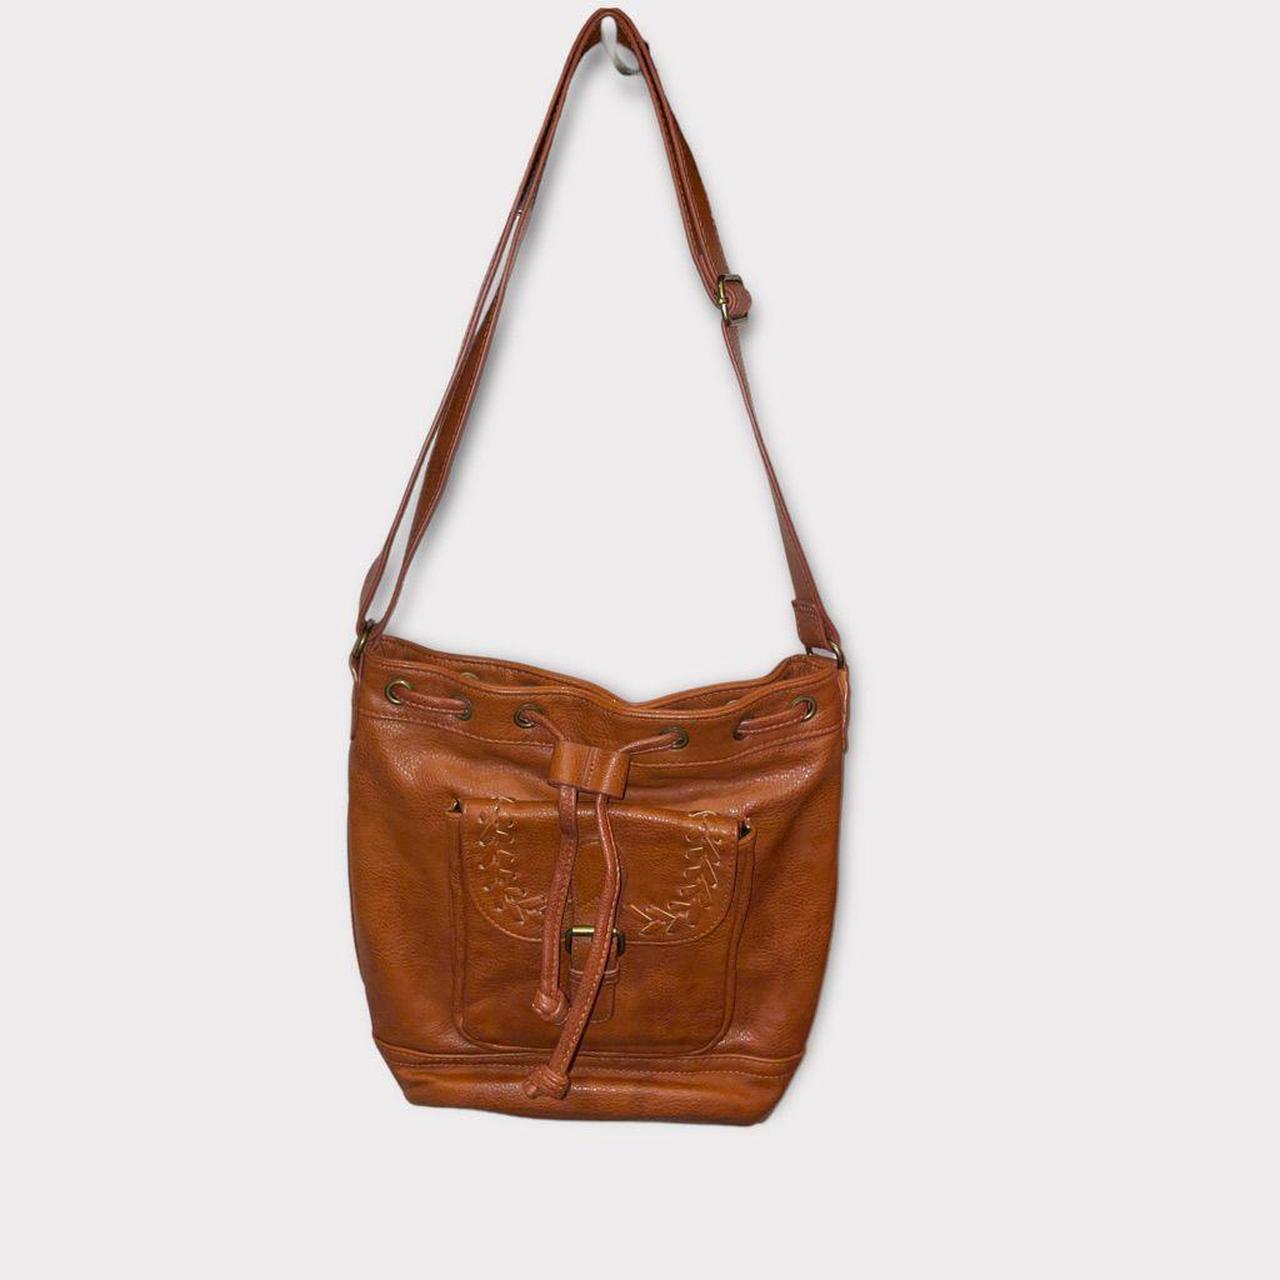 Product Image 3 - This Mossimo bucket bag is